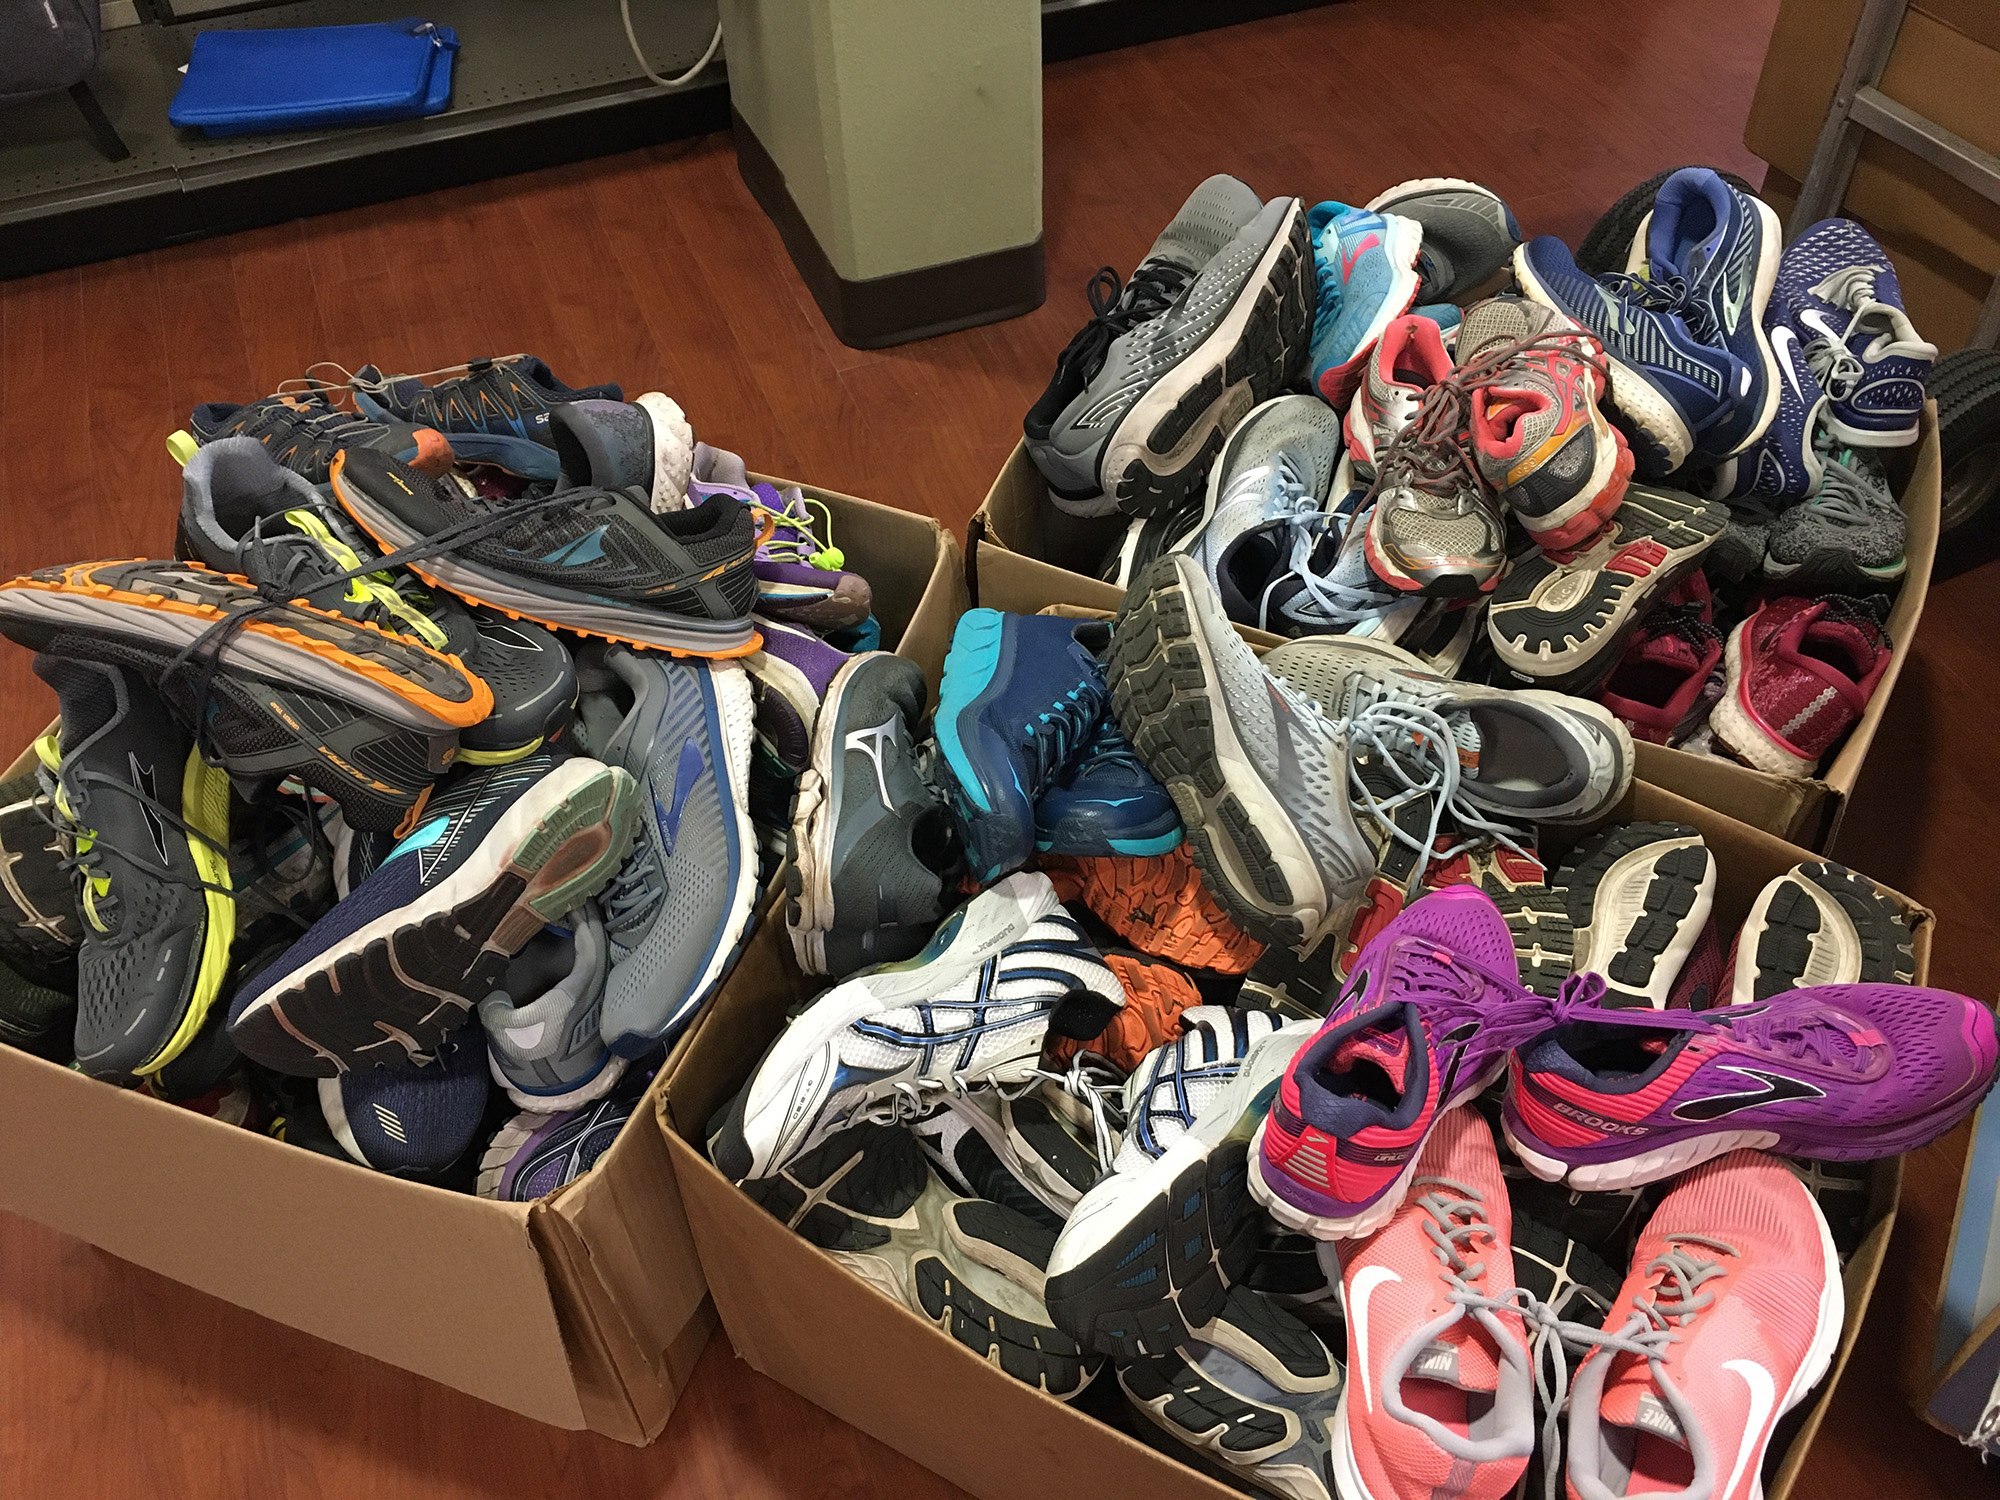 More than 70 pairs of shoes donated by the Kalamazoo Area Runners in Battle Creek this month.